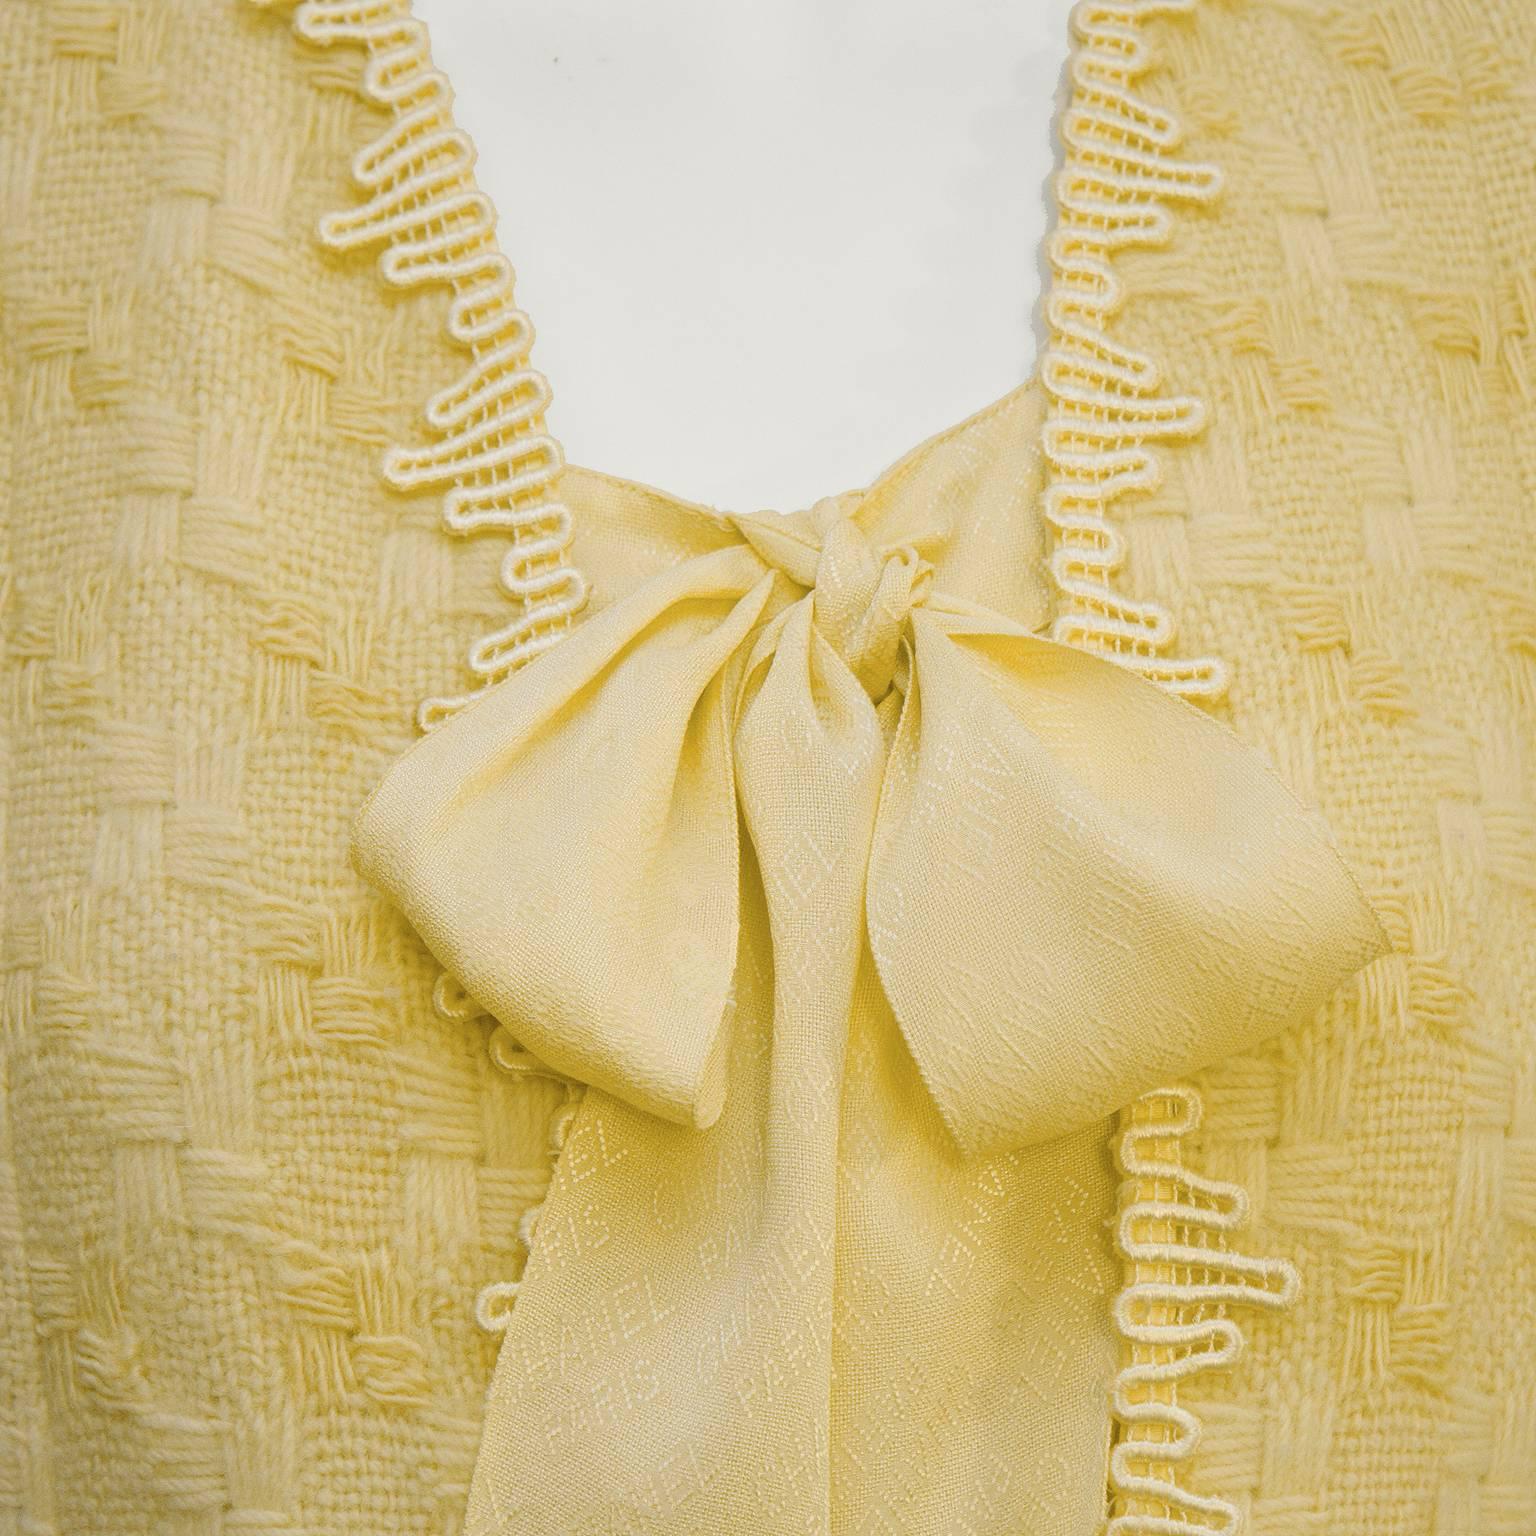 Women's 1970’s Chanel Yellow Boucle Jacket with Rickrack Trim